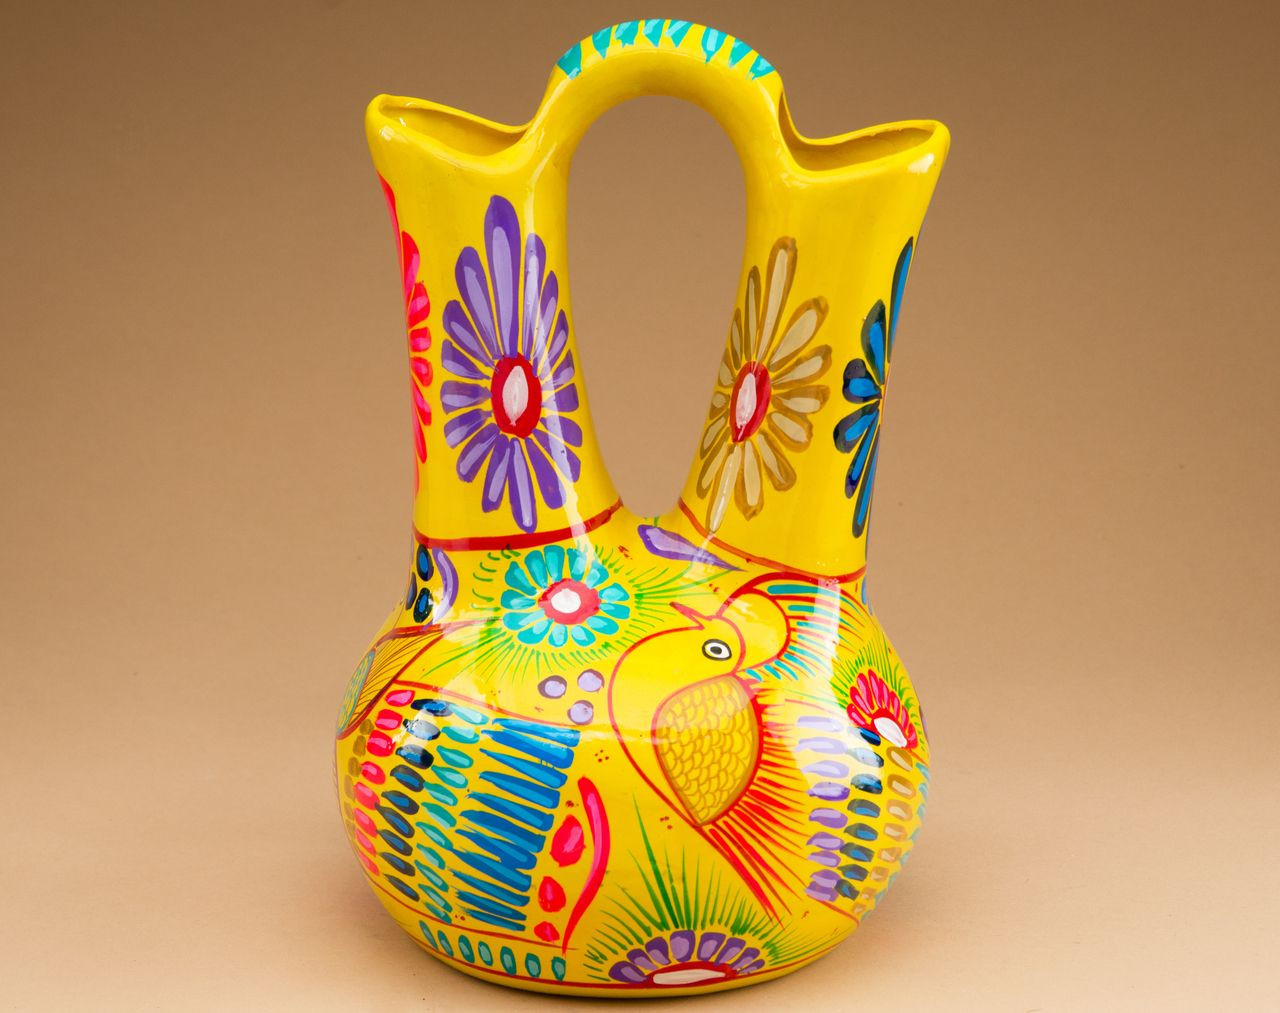 11 Elegant Horsehair Wedding Vase 2024 free download horsehair wedding vase of southwest talavera pottery wedding vase 11 p362 pinterest pertaining to hand painted southwest talavera wedding vases are one of the outstanding ceramics of souther